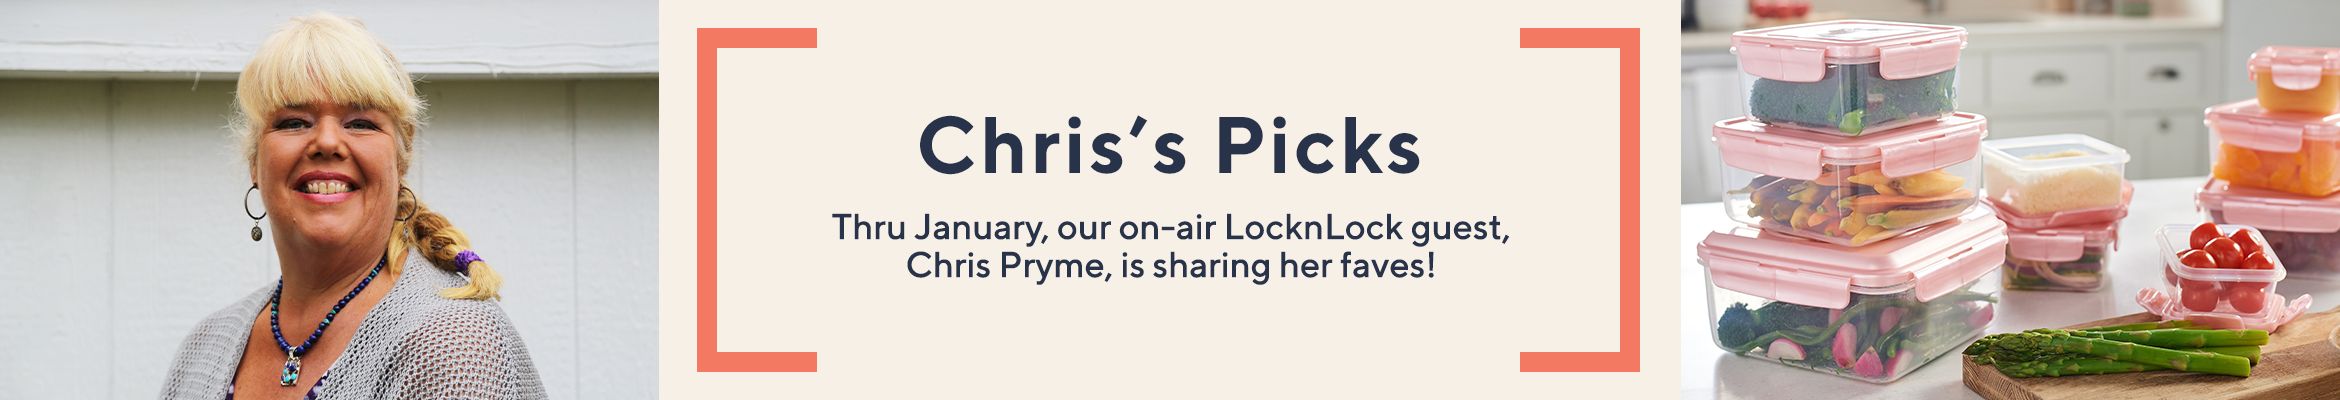 Chris's Picks Thru January, our on-air LocknLock guest, Chris Pryme, is sharing her faves